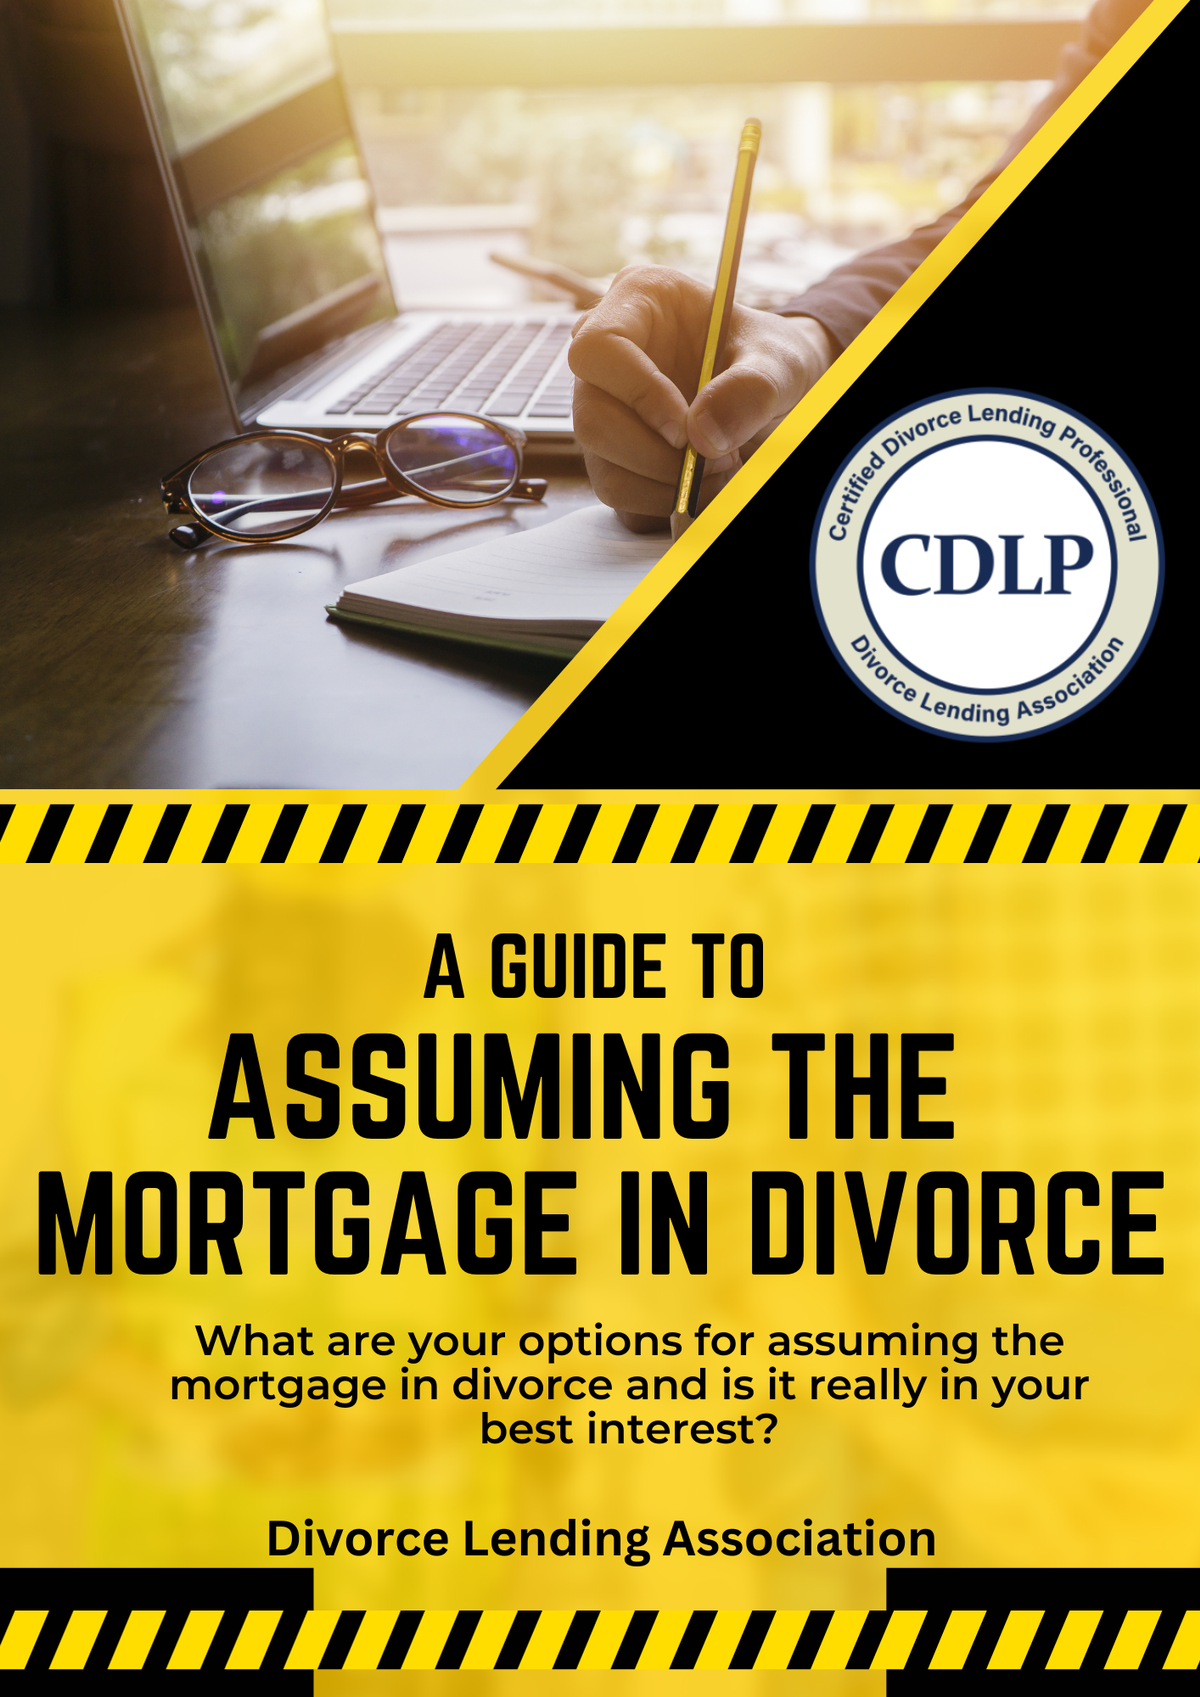 A Guide to Assuming the Mortgage in Divorce